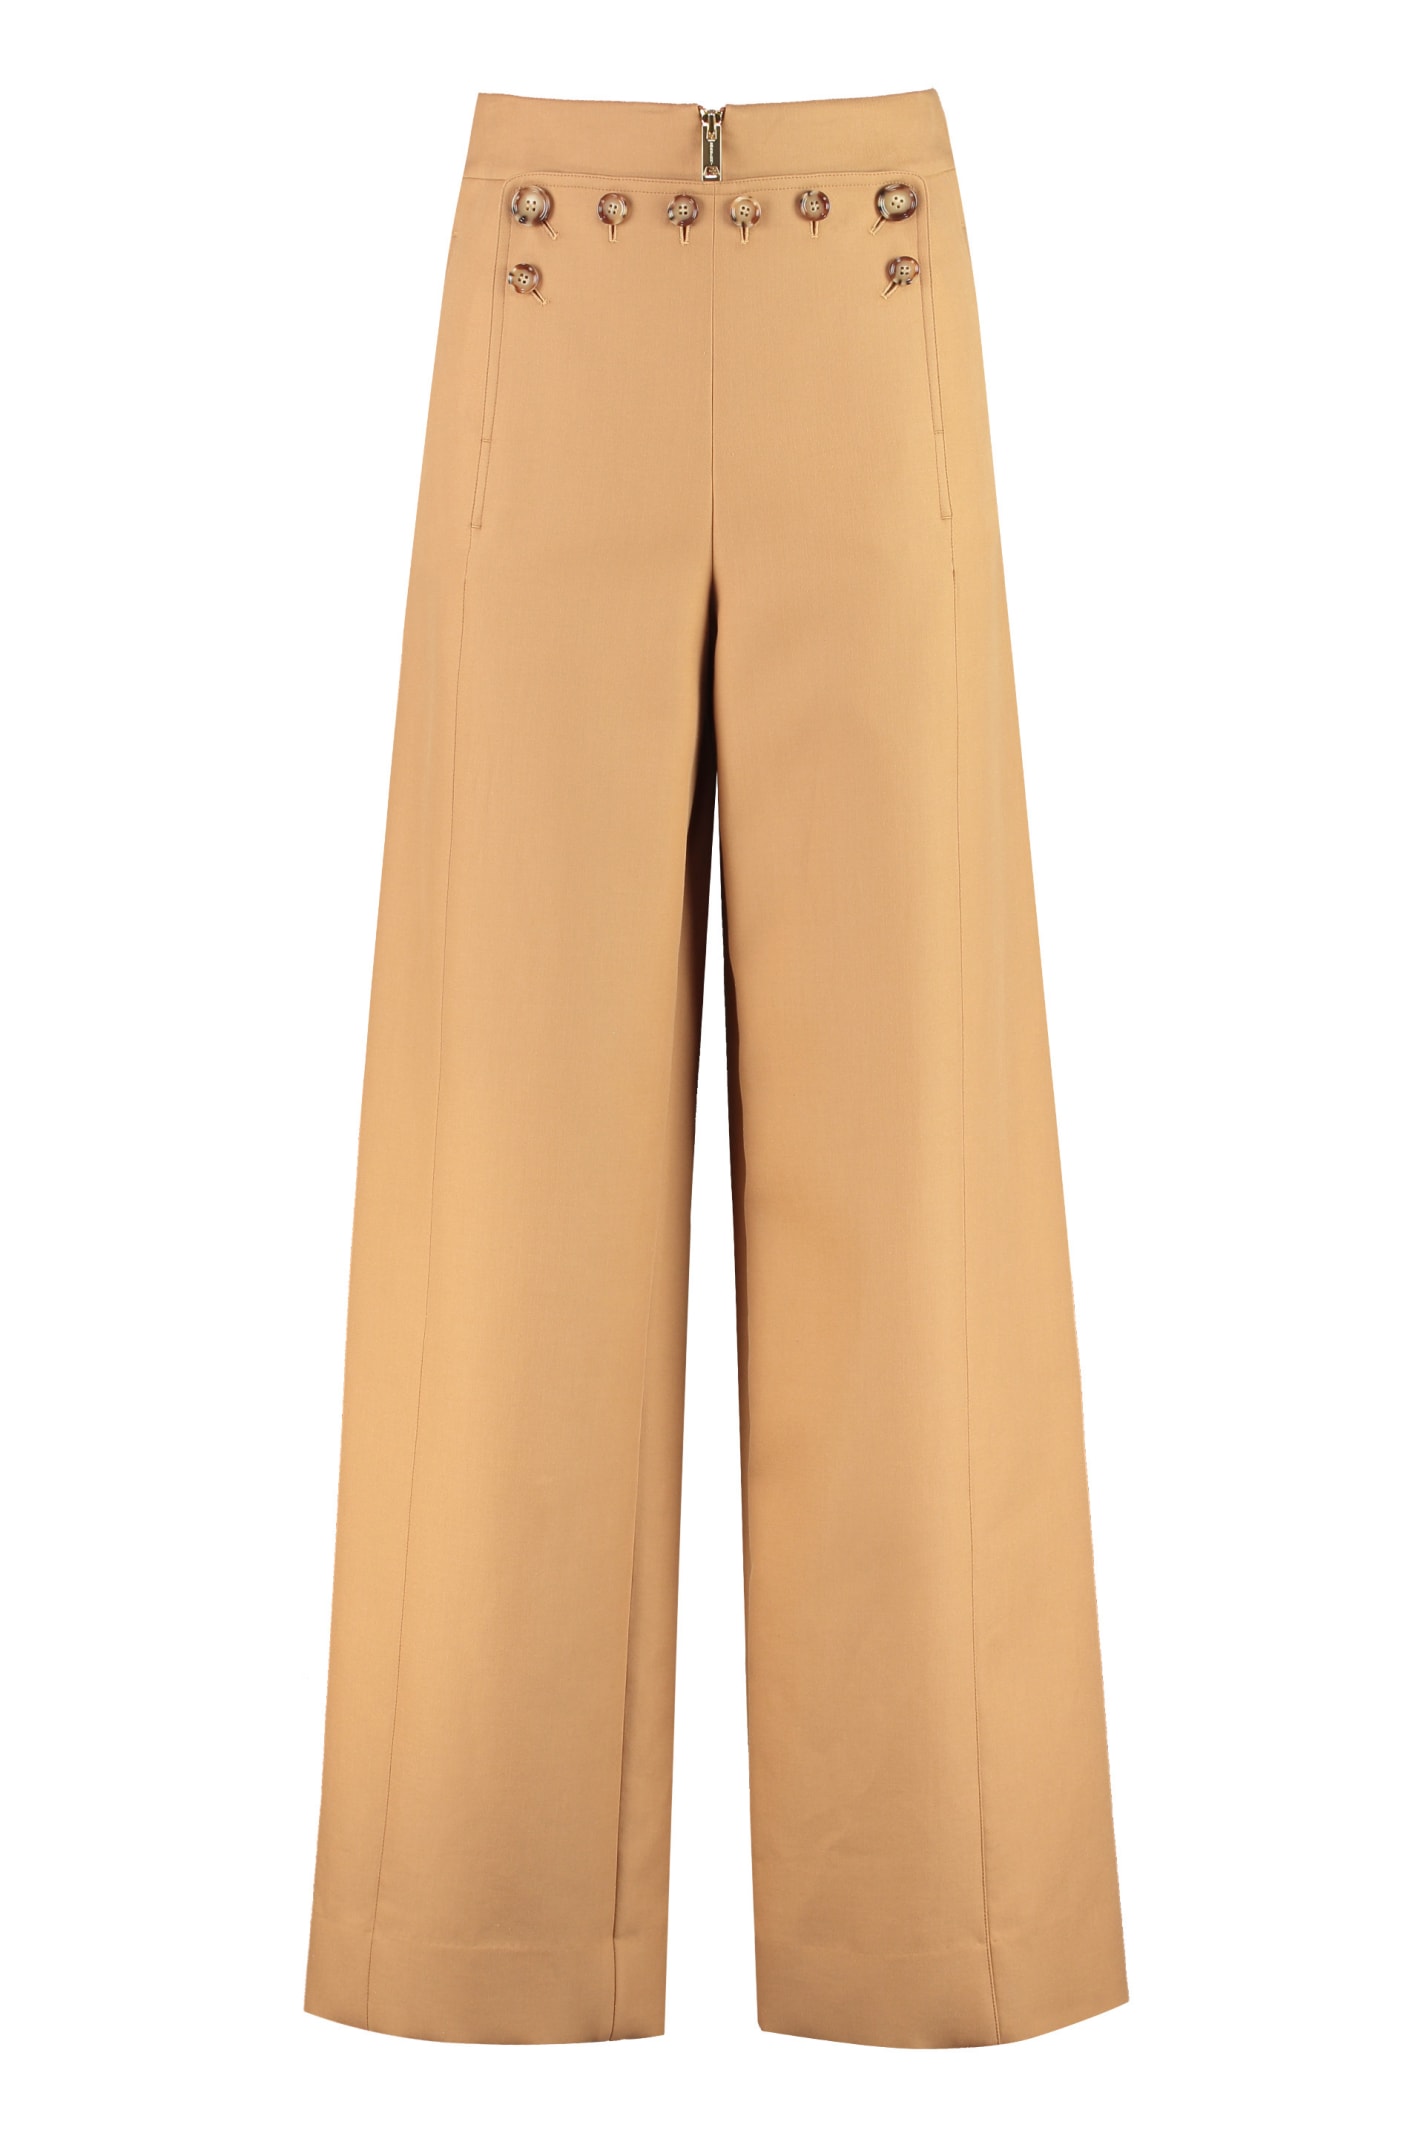 Burberry Wide-leg Trousers